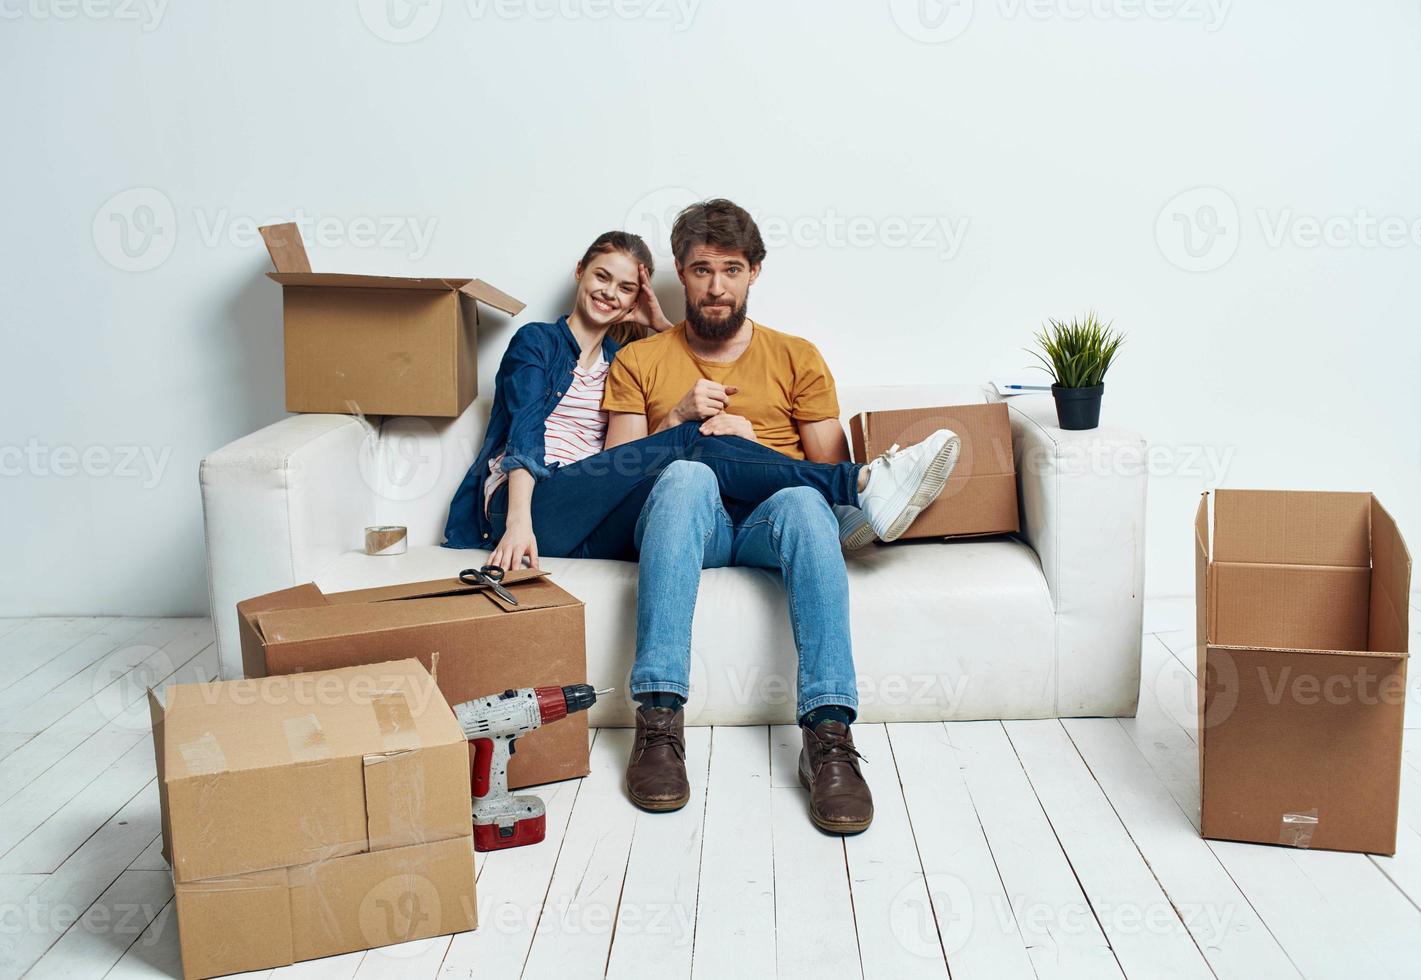 A room on a white sofa with boxes moving apartments photo